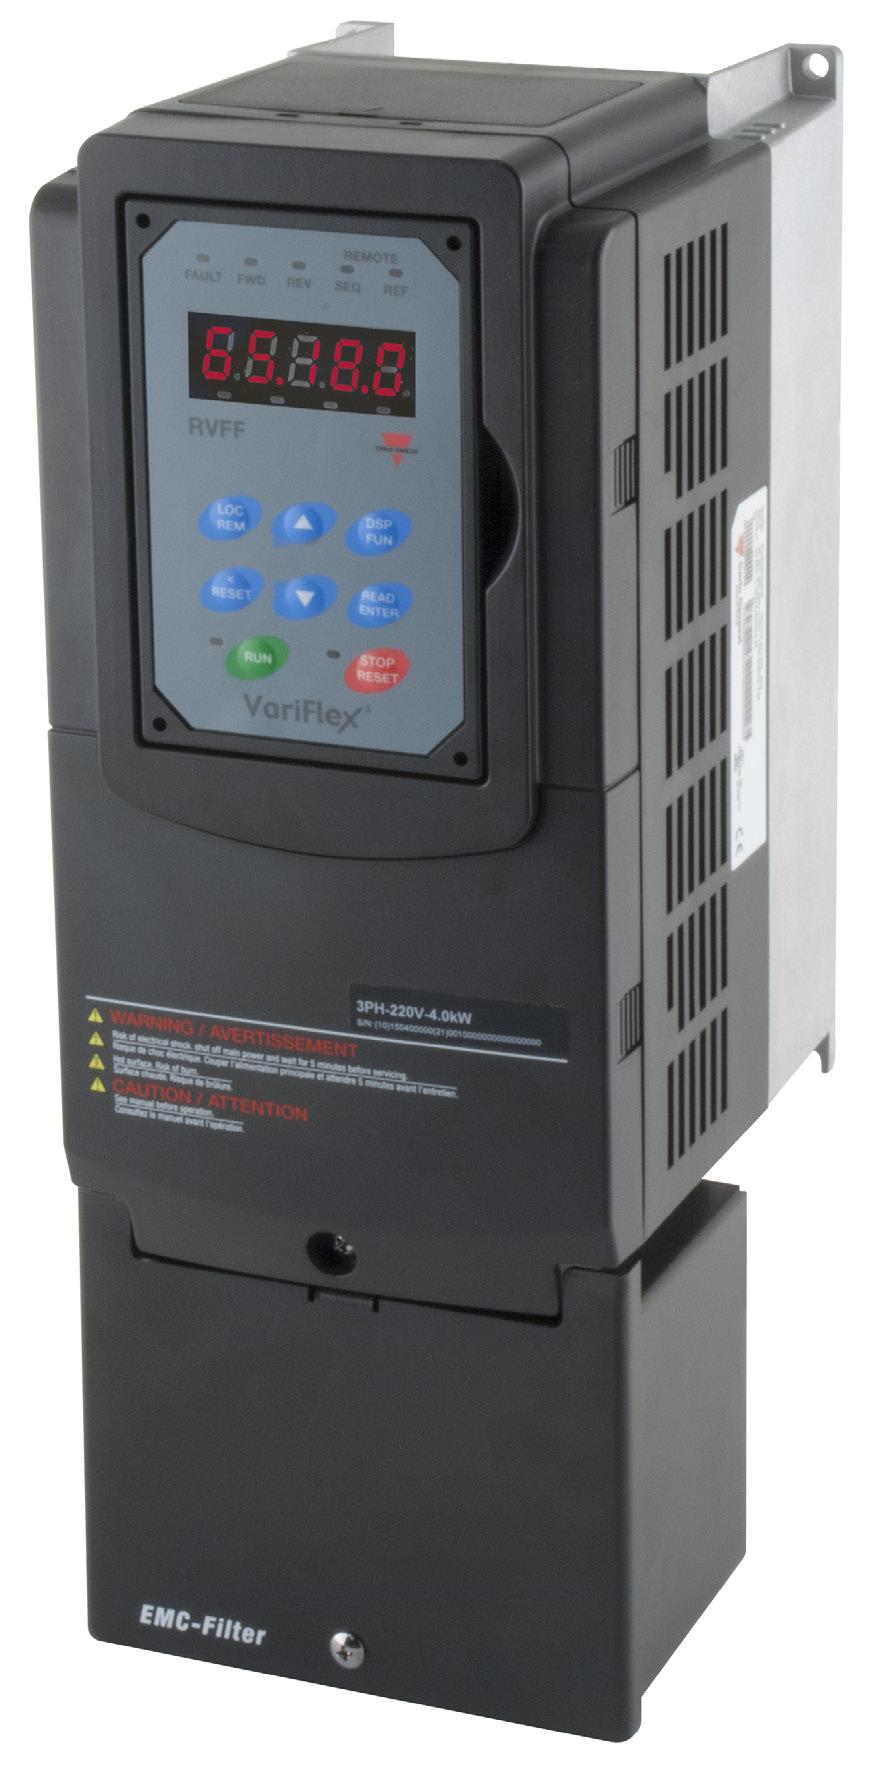 RVFF series AC Variable frequency drives imensions RVFFA3400400F RVFFA3400550F RVFFA3400750F RVFFB3401100F RVFFB3401500F RVFFC3401850F RVFFC3402200F RVFFC3403000F RVFF3403700F RVFF3404500F